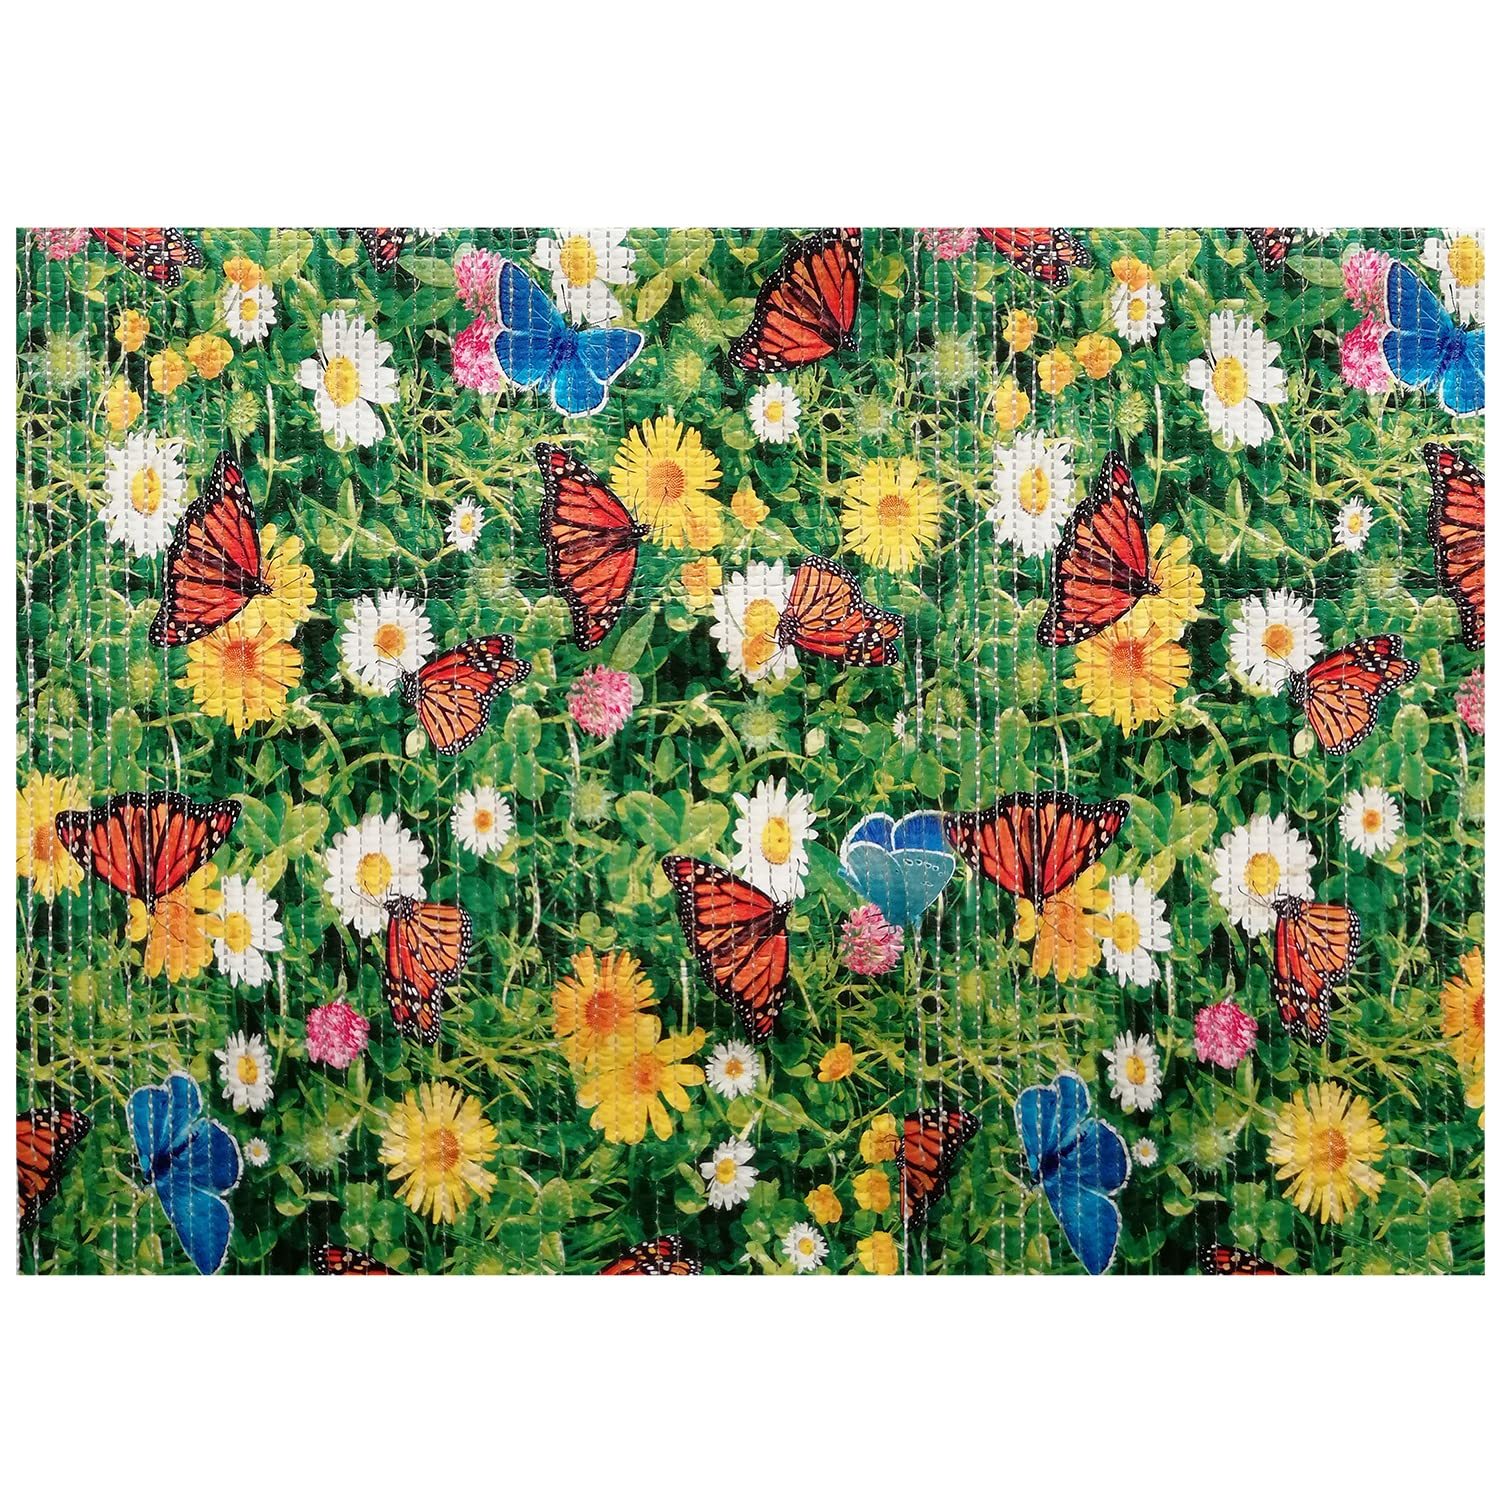 Primary image for Dundee Deco Floral Bathroom Mat - 39" x 26" Green Waterproof Non-Slip Quick Dry 